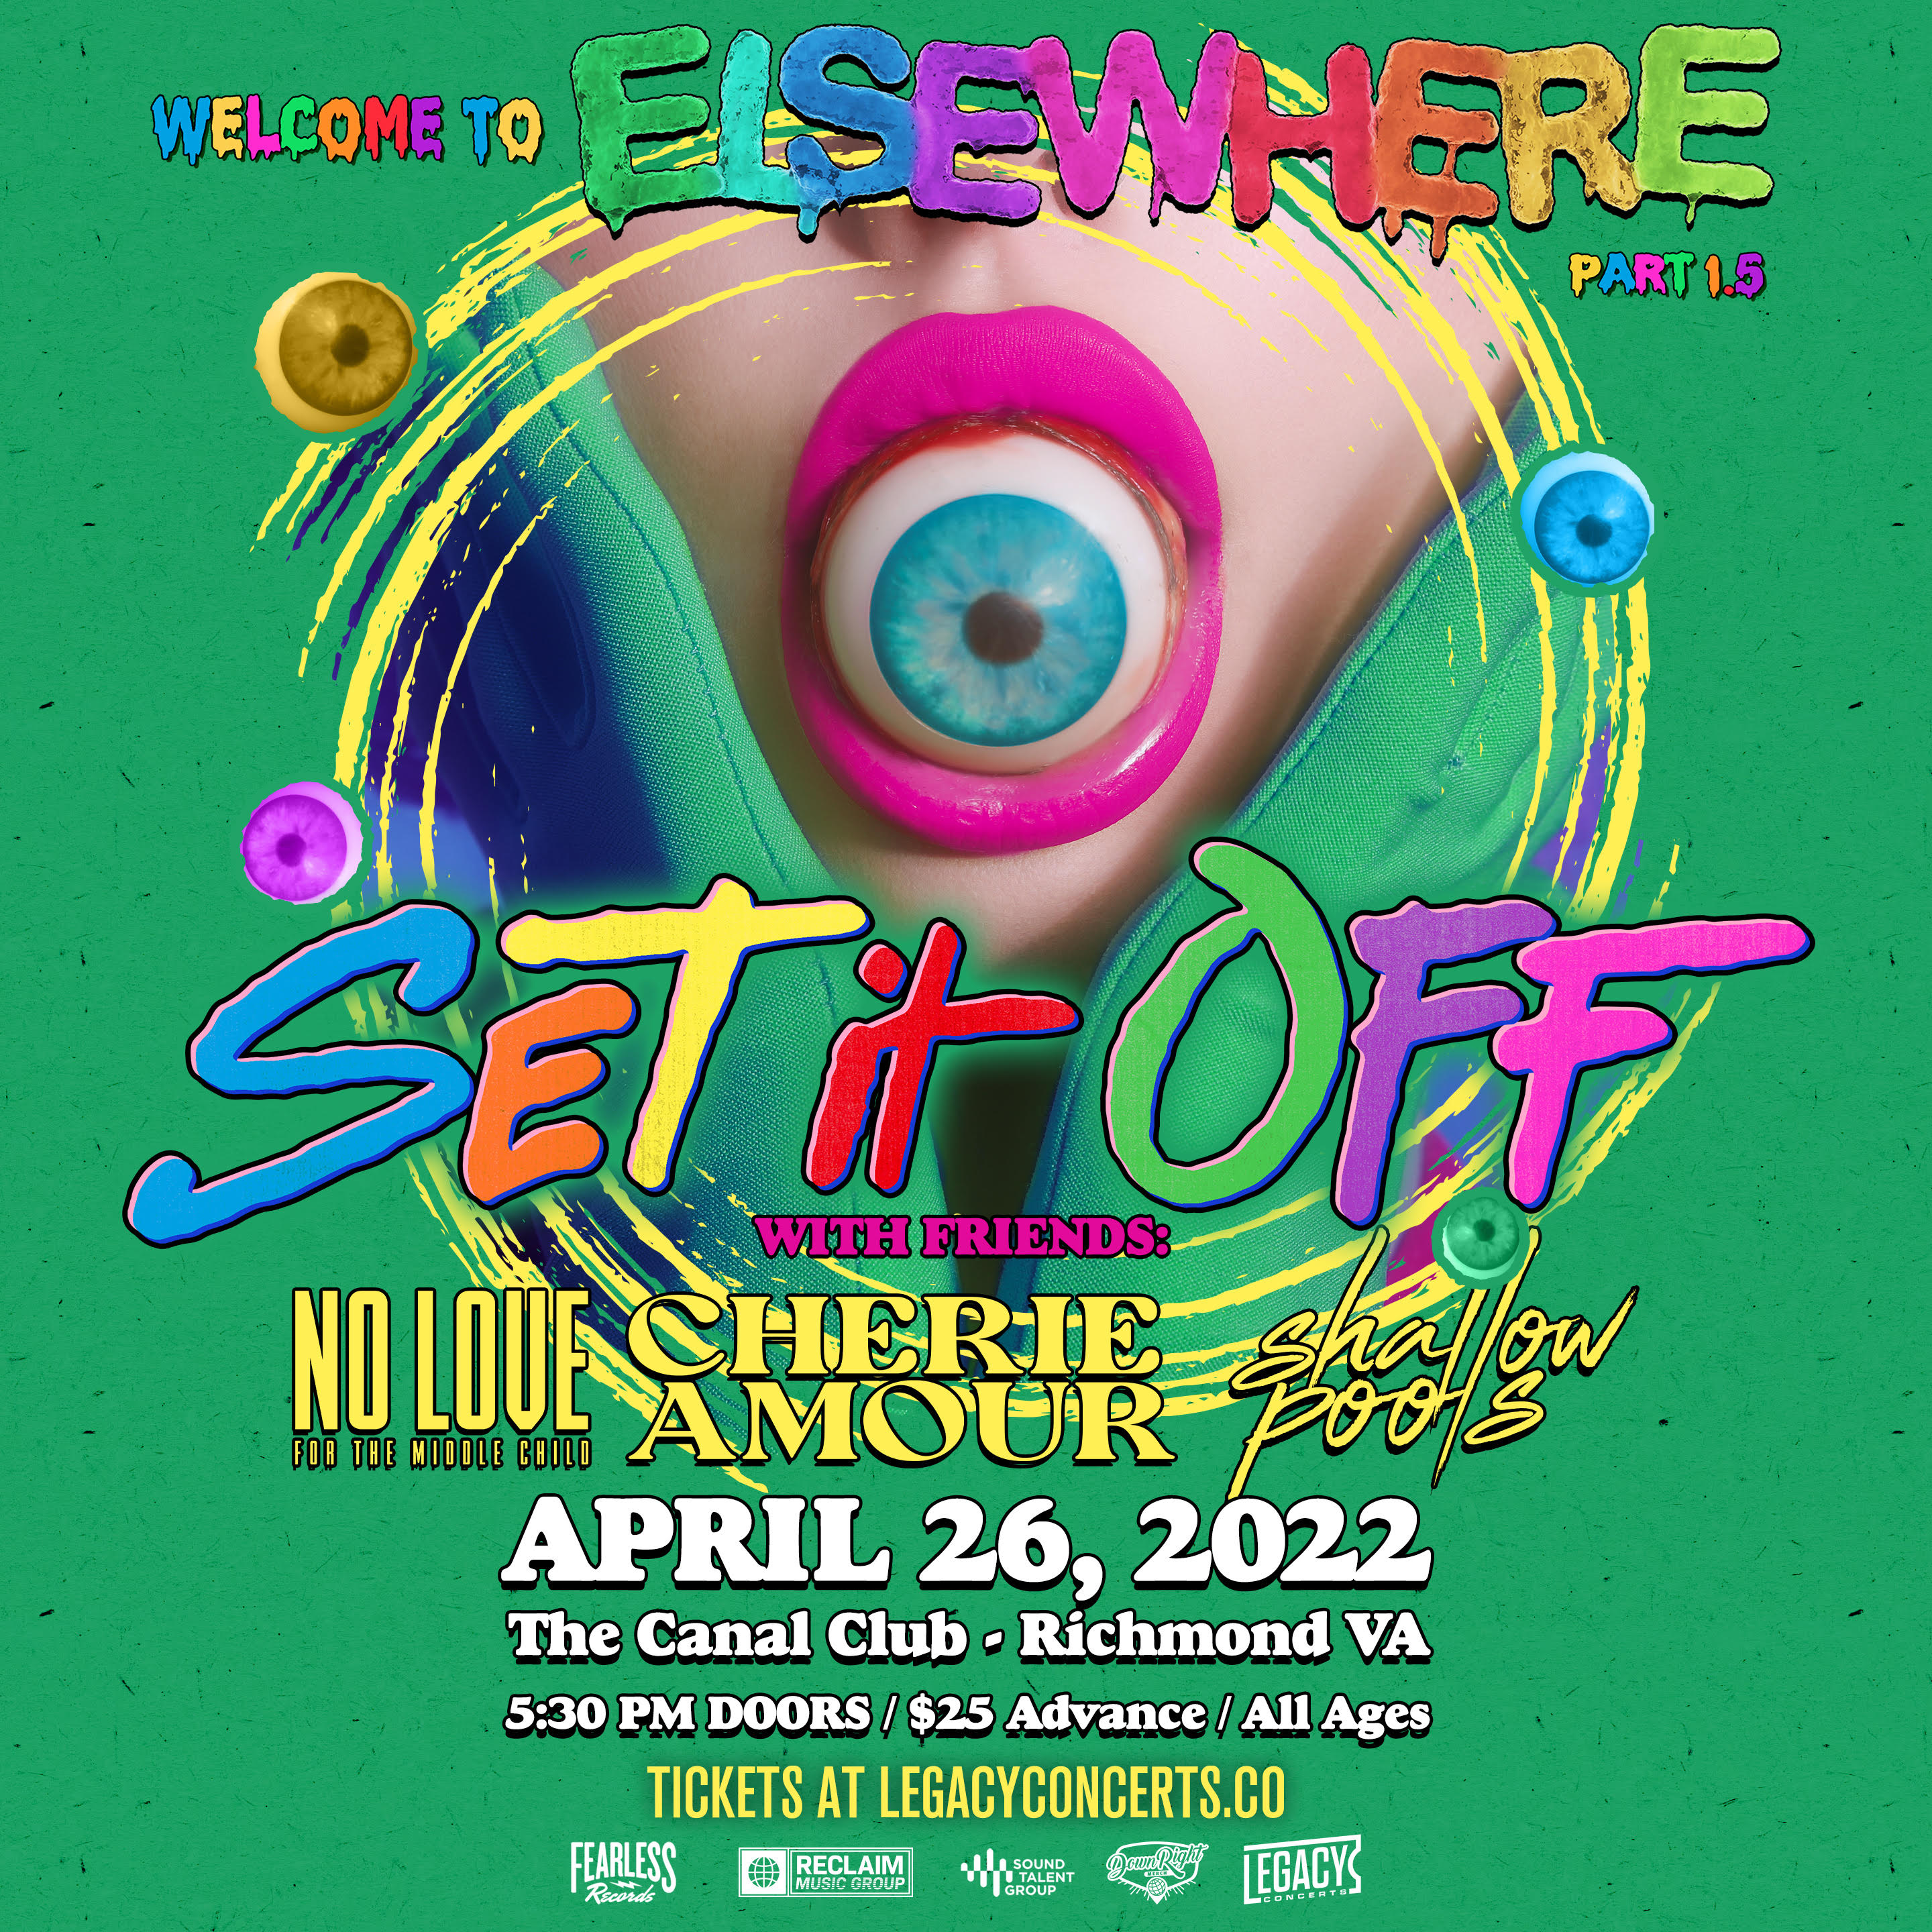 Buy Tickets to Set It Off in Richmond on Apr 26, 2022